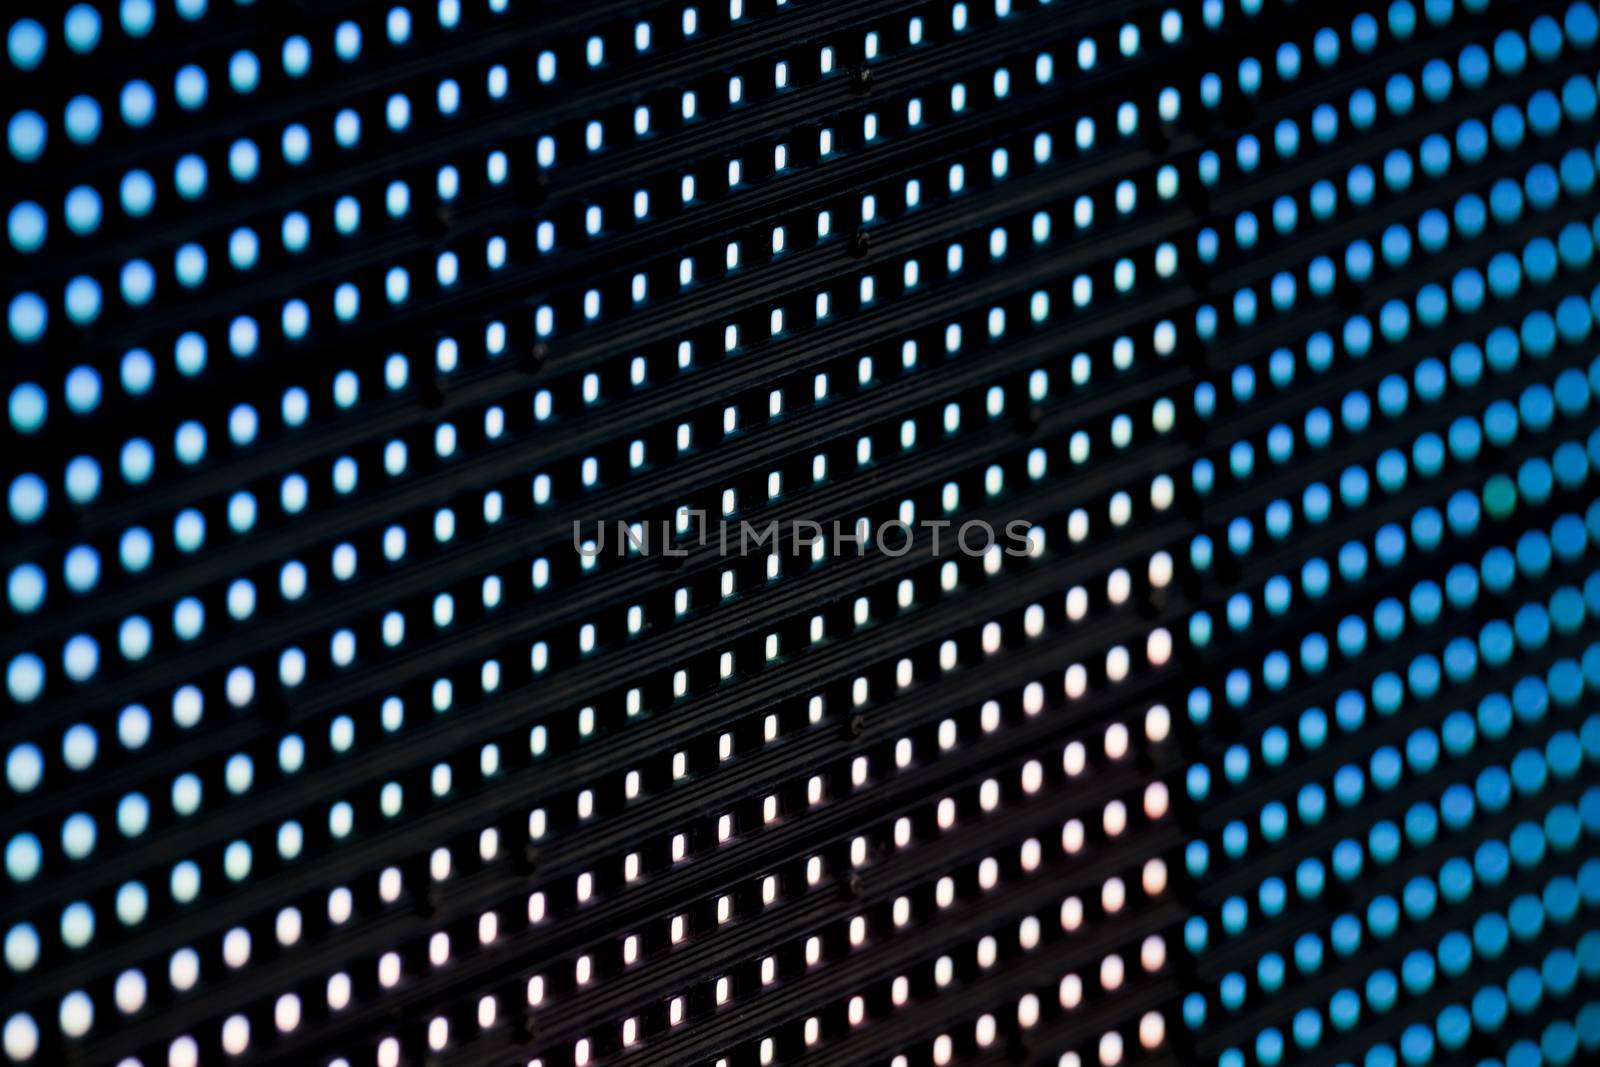 RGB led diode display panel with blue diodes turned on. Selective focus. Shallow depth of field.